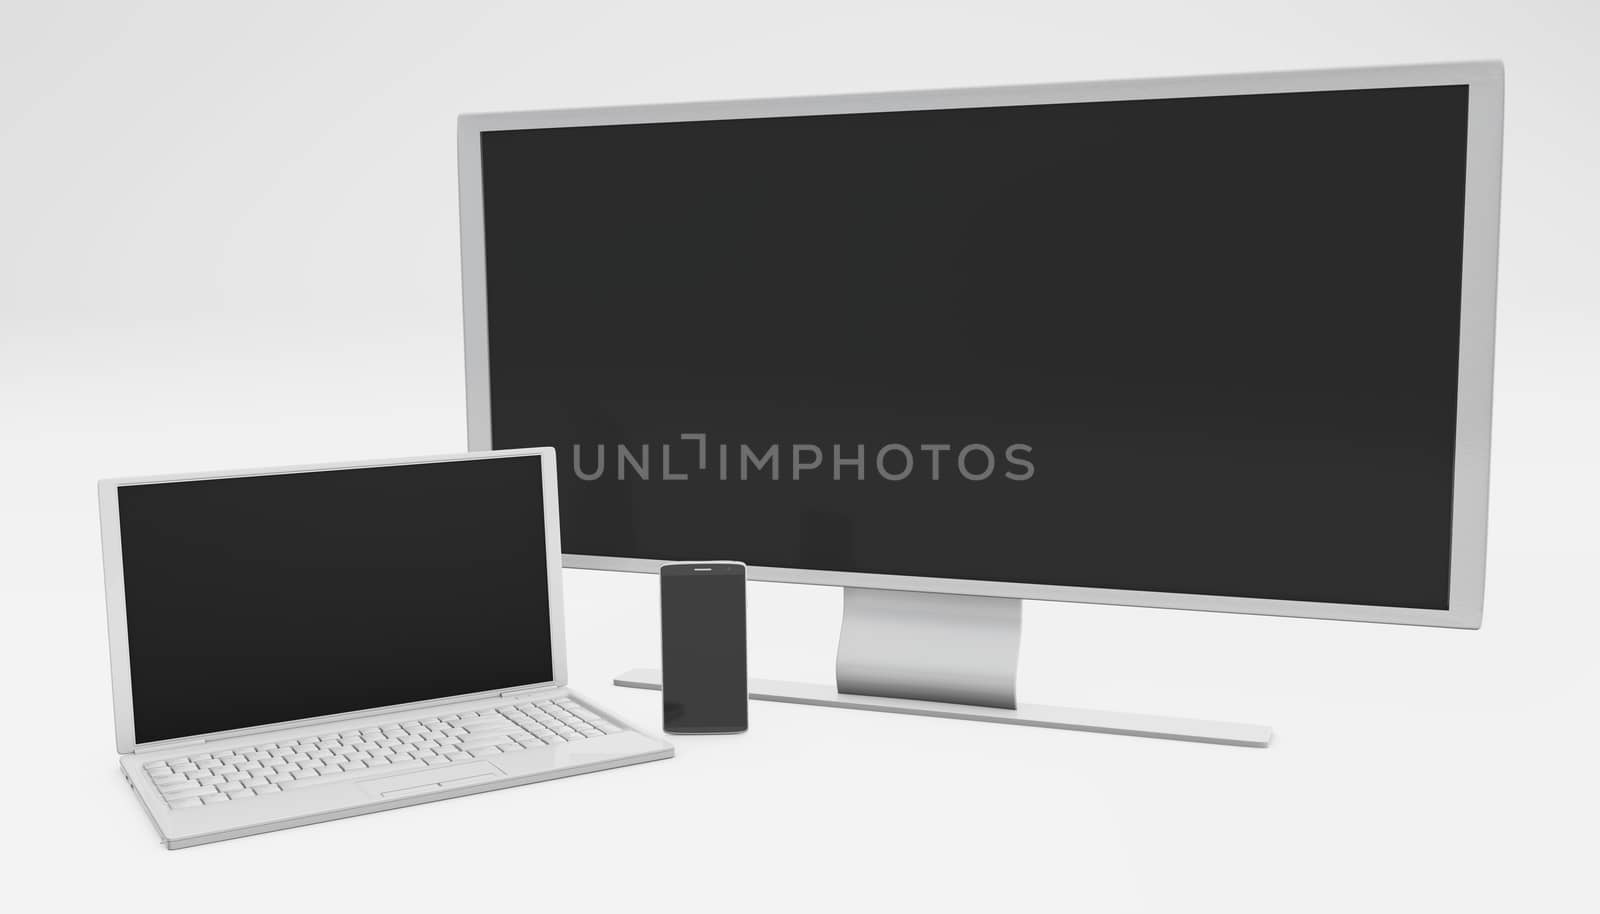 Multi platoform concept telco bundle wide tv laptop smartphone 3d rendering isolated on white